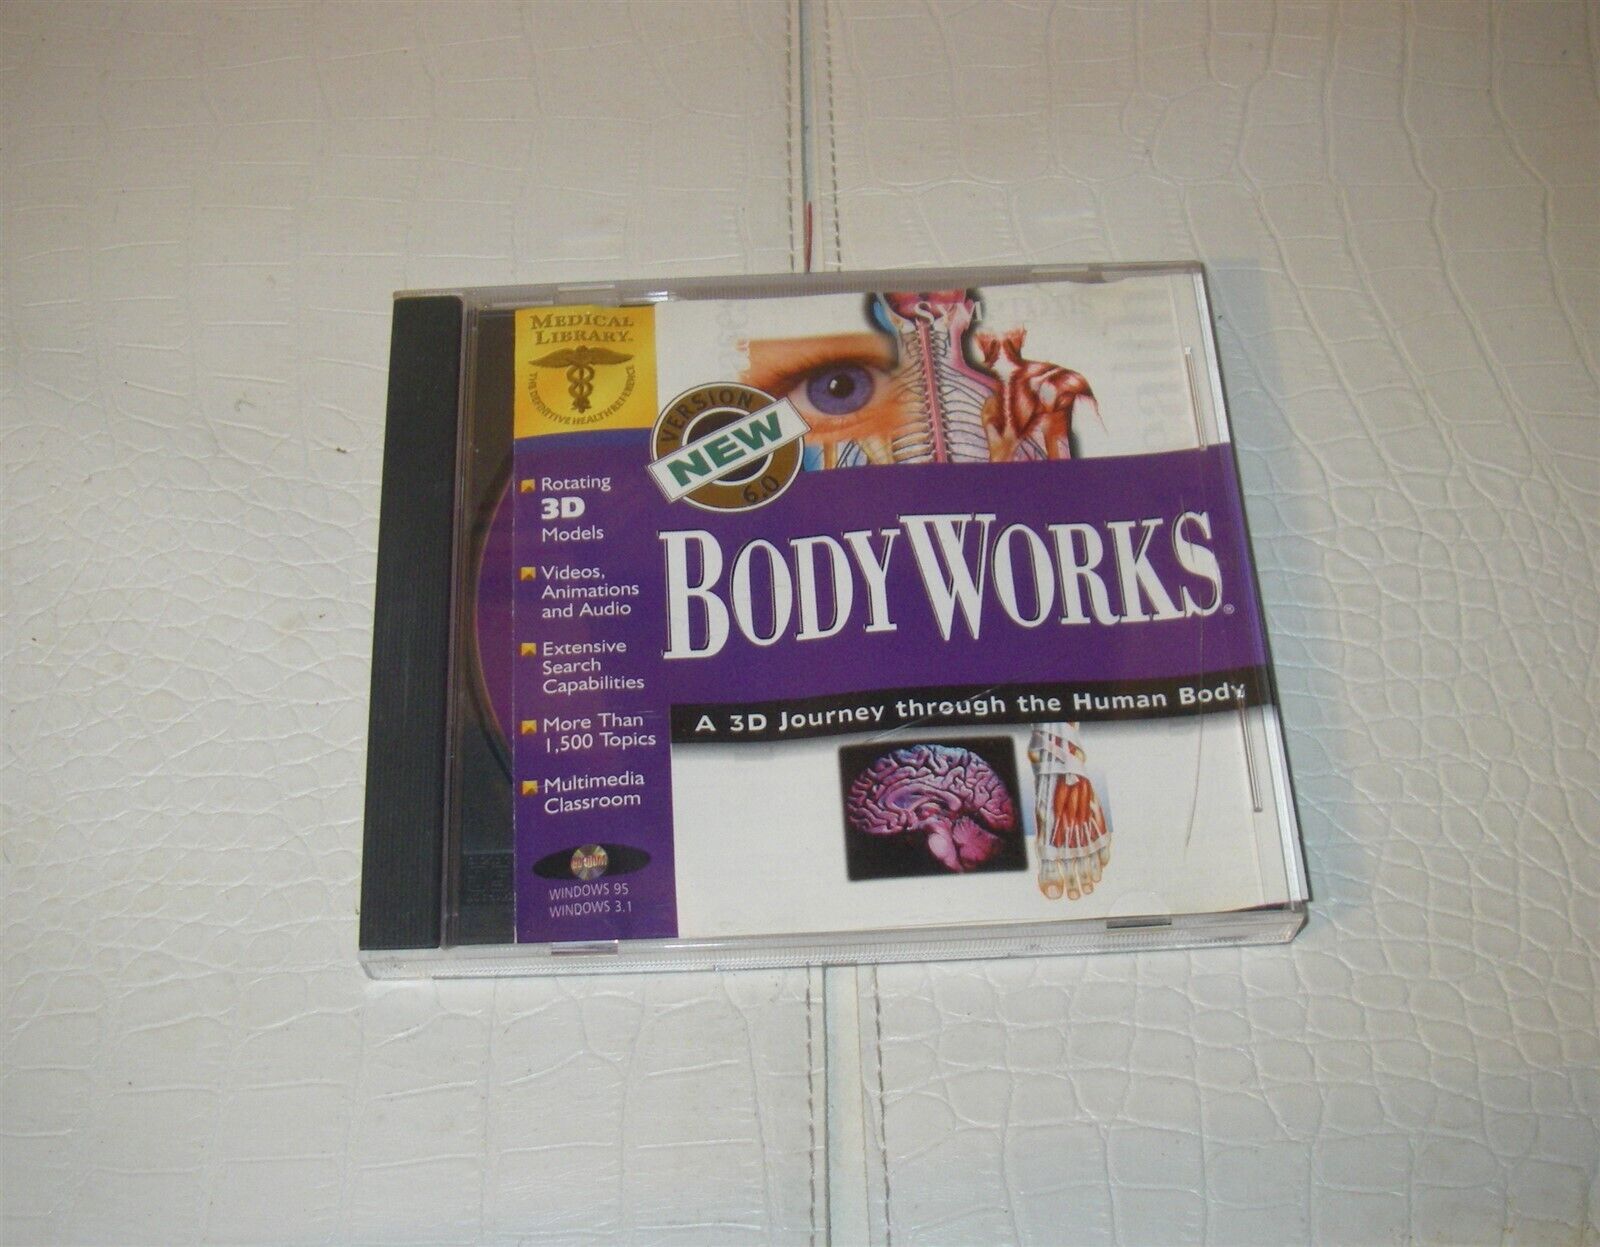 MEDICAL LIBRARY BODY WORKS A 3D JOURNEY THROUGH THE HUMAN BODY CD S696